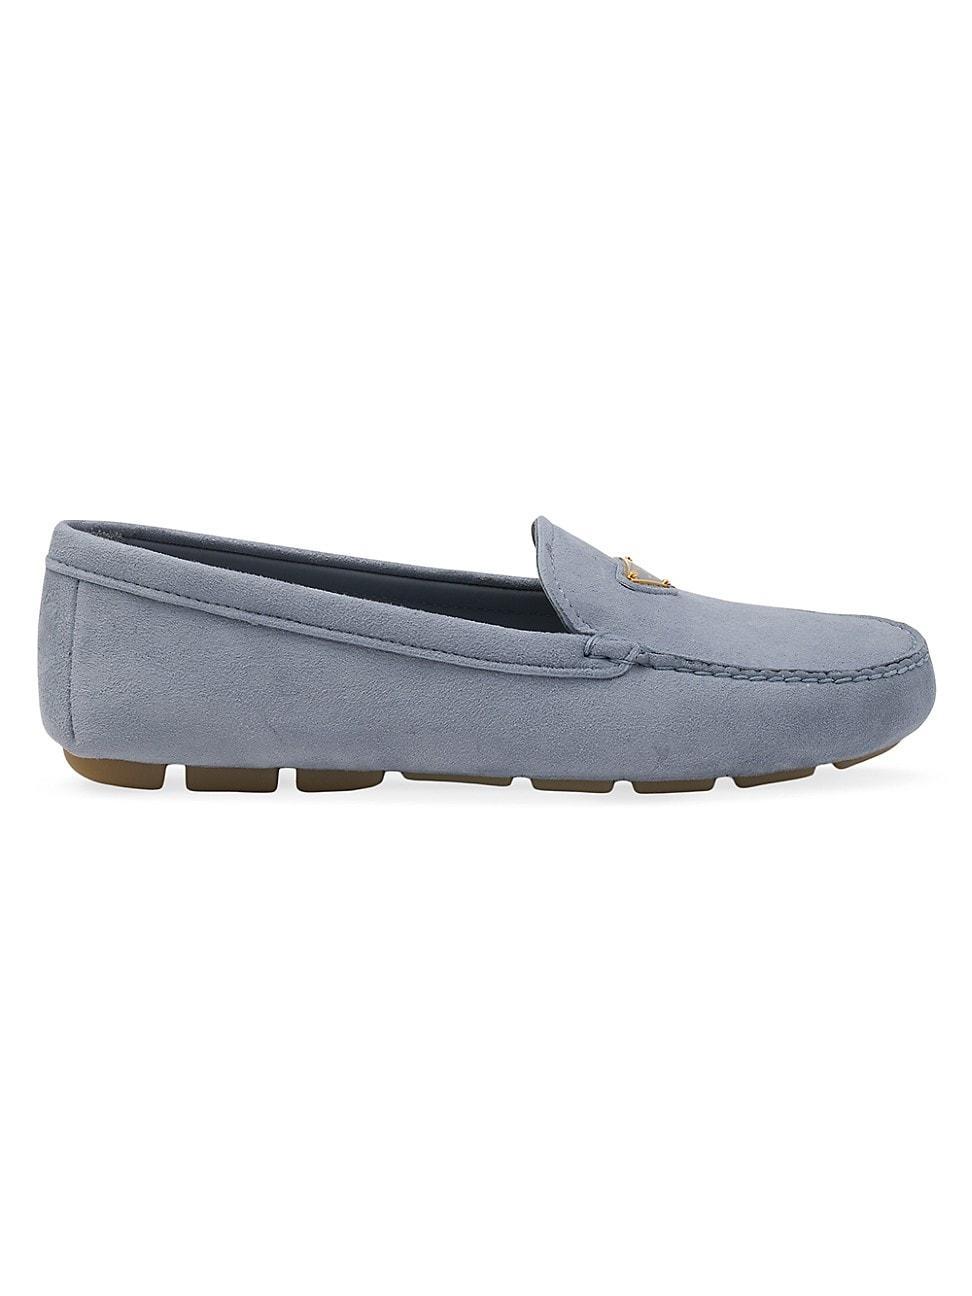 Womens Suede Driving Loafers Product Image